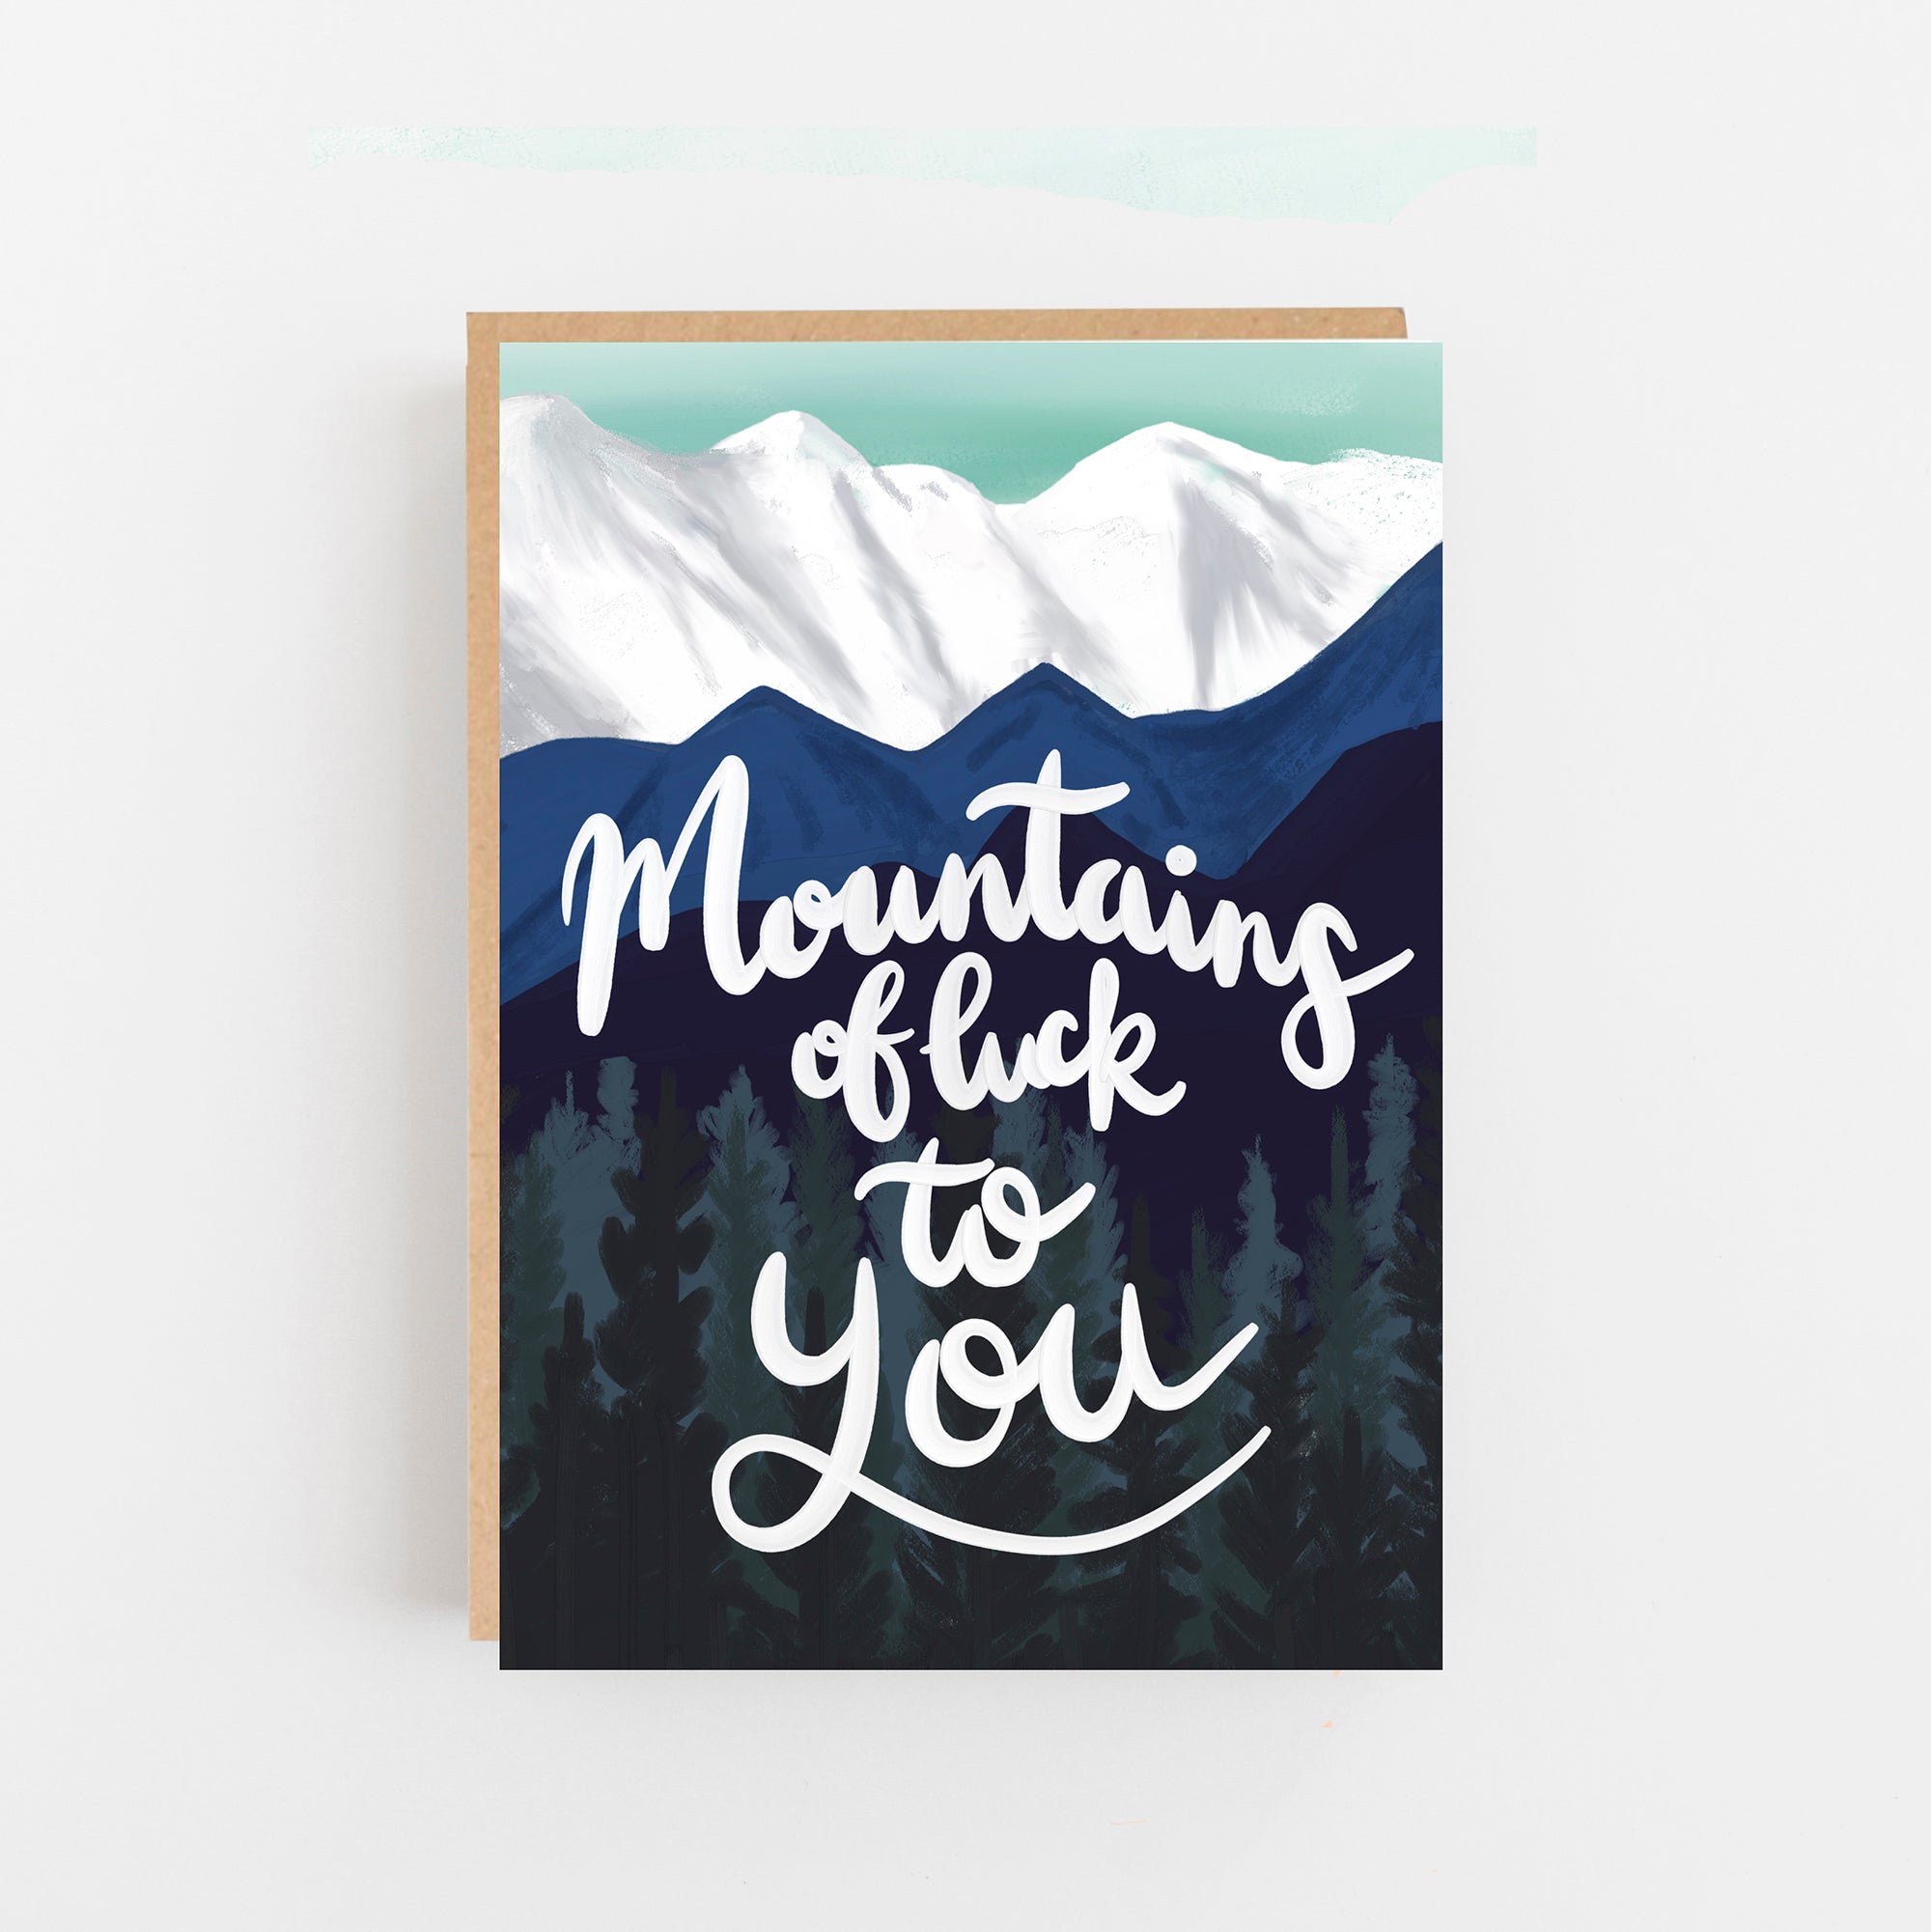 Mountains of Luck To You Card